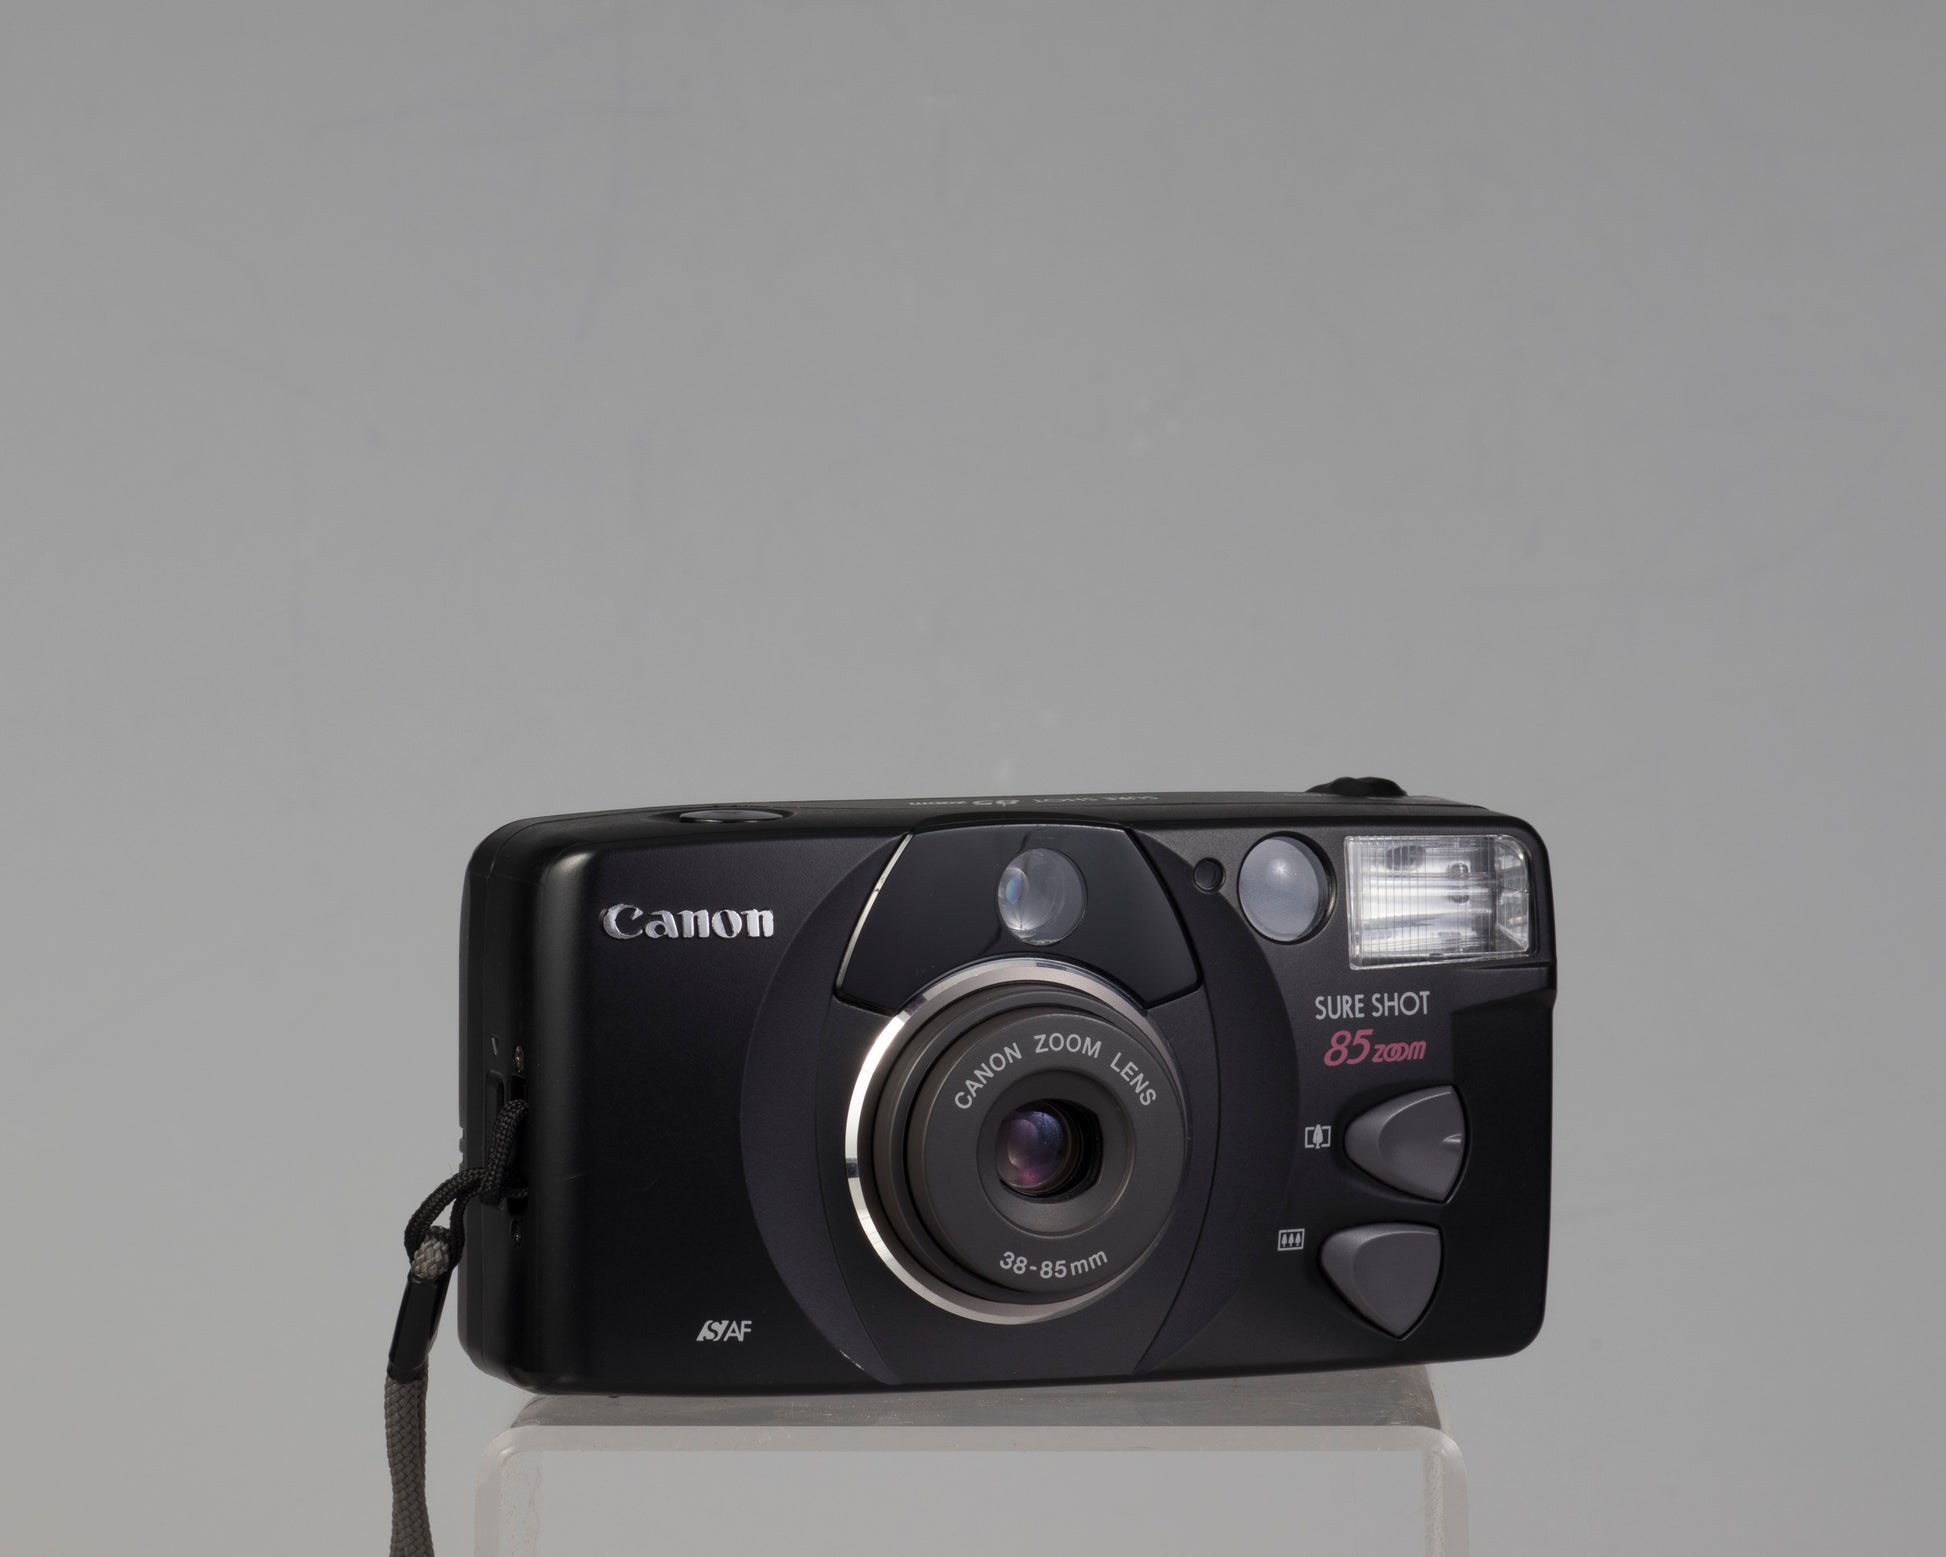 The Canon Sure Shot Zoom 85 (black) is a compact 35mm camera from the late 1990s